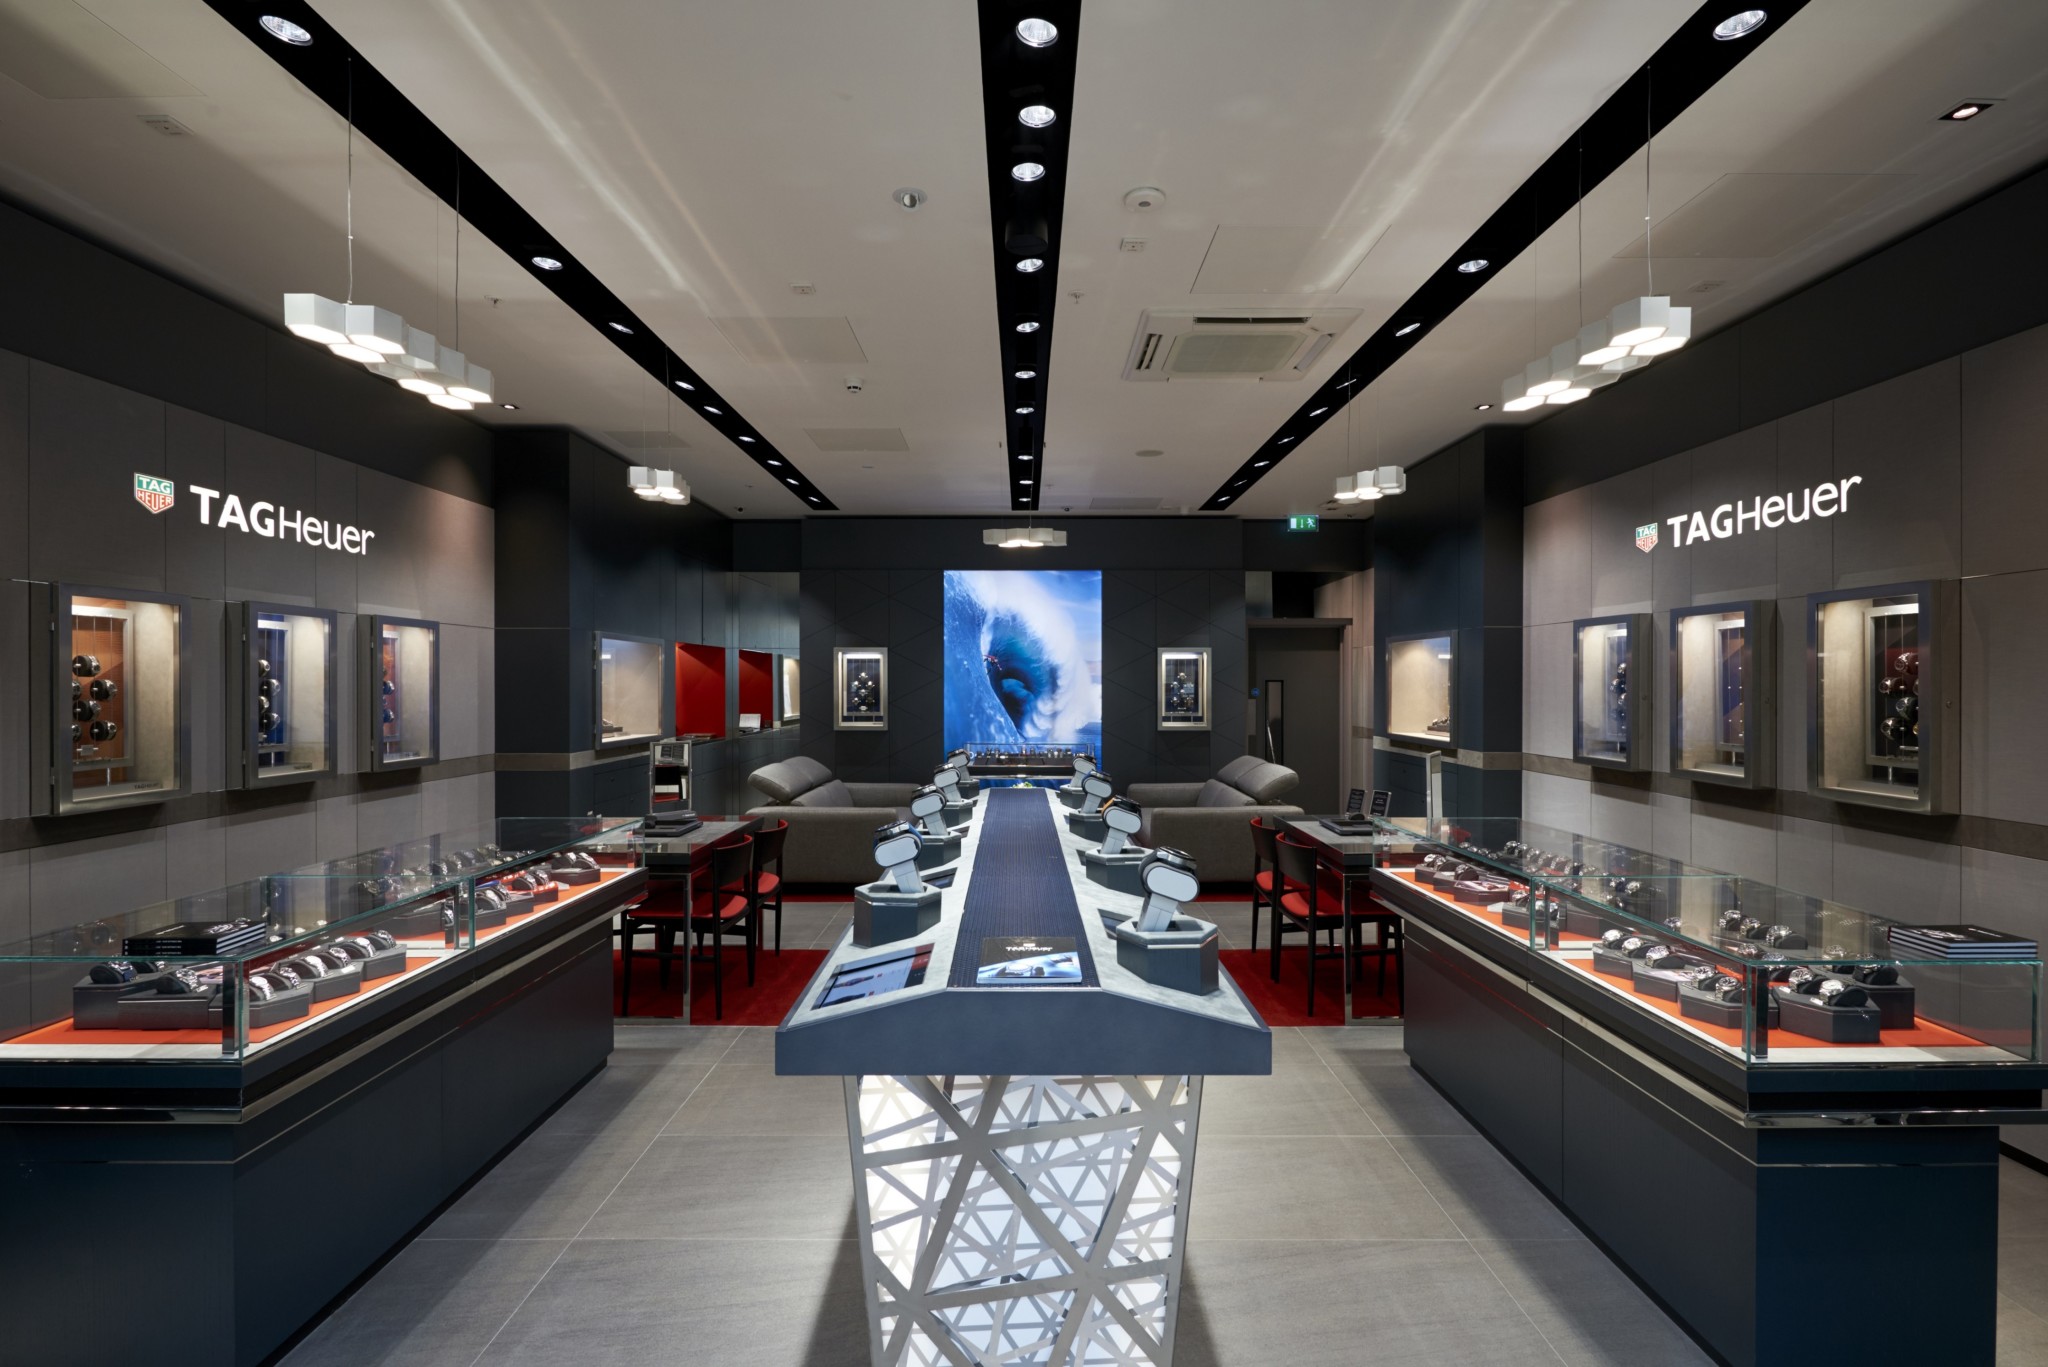 The brand new tag heuer boutique in meadowhall (2)